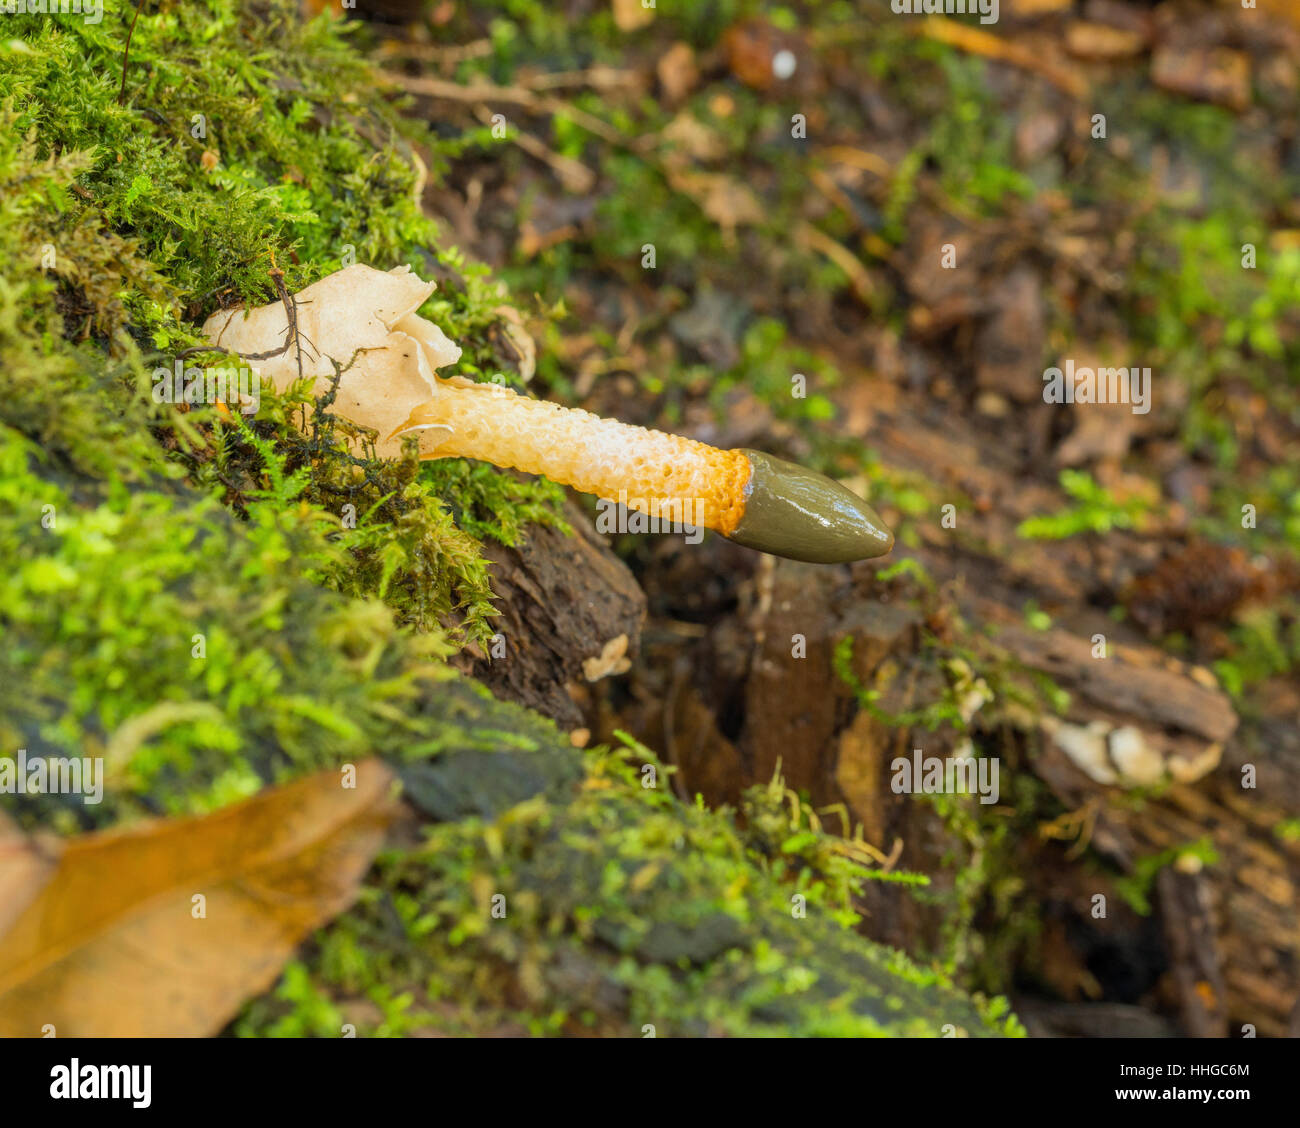 Dog Stinkhorn, or Mutinus caninus, a fungus that grows in woodland areas near moss and decaying, rotting wood Stock Photo